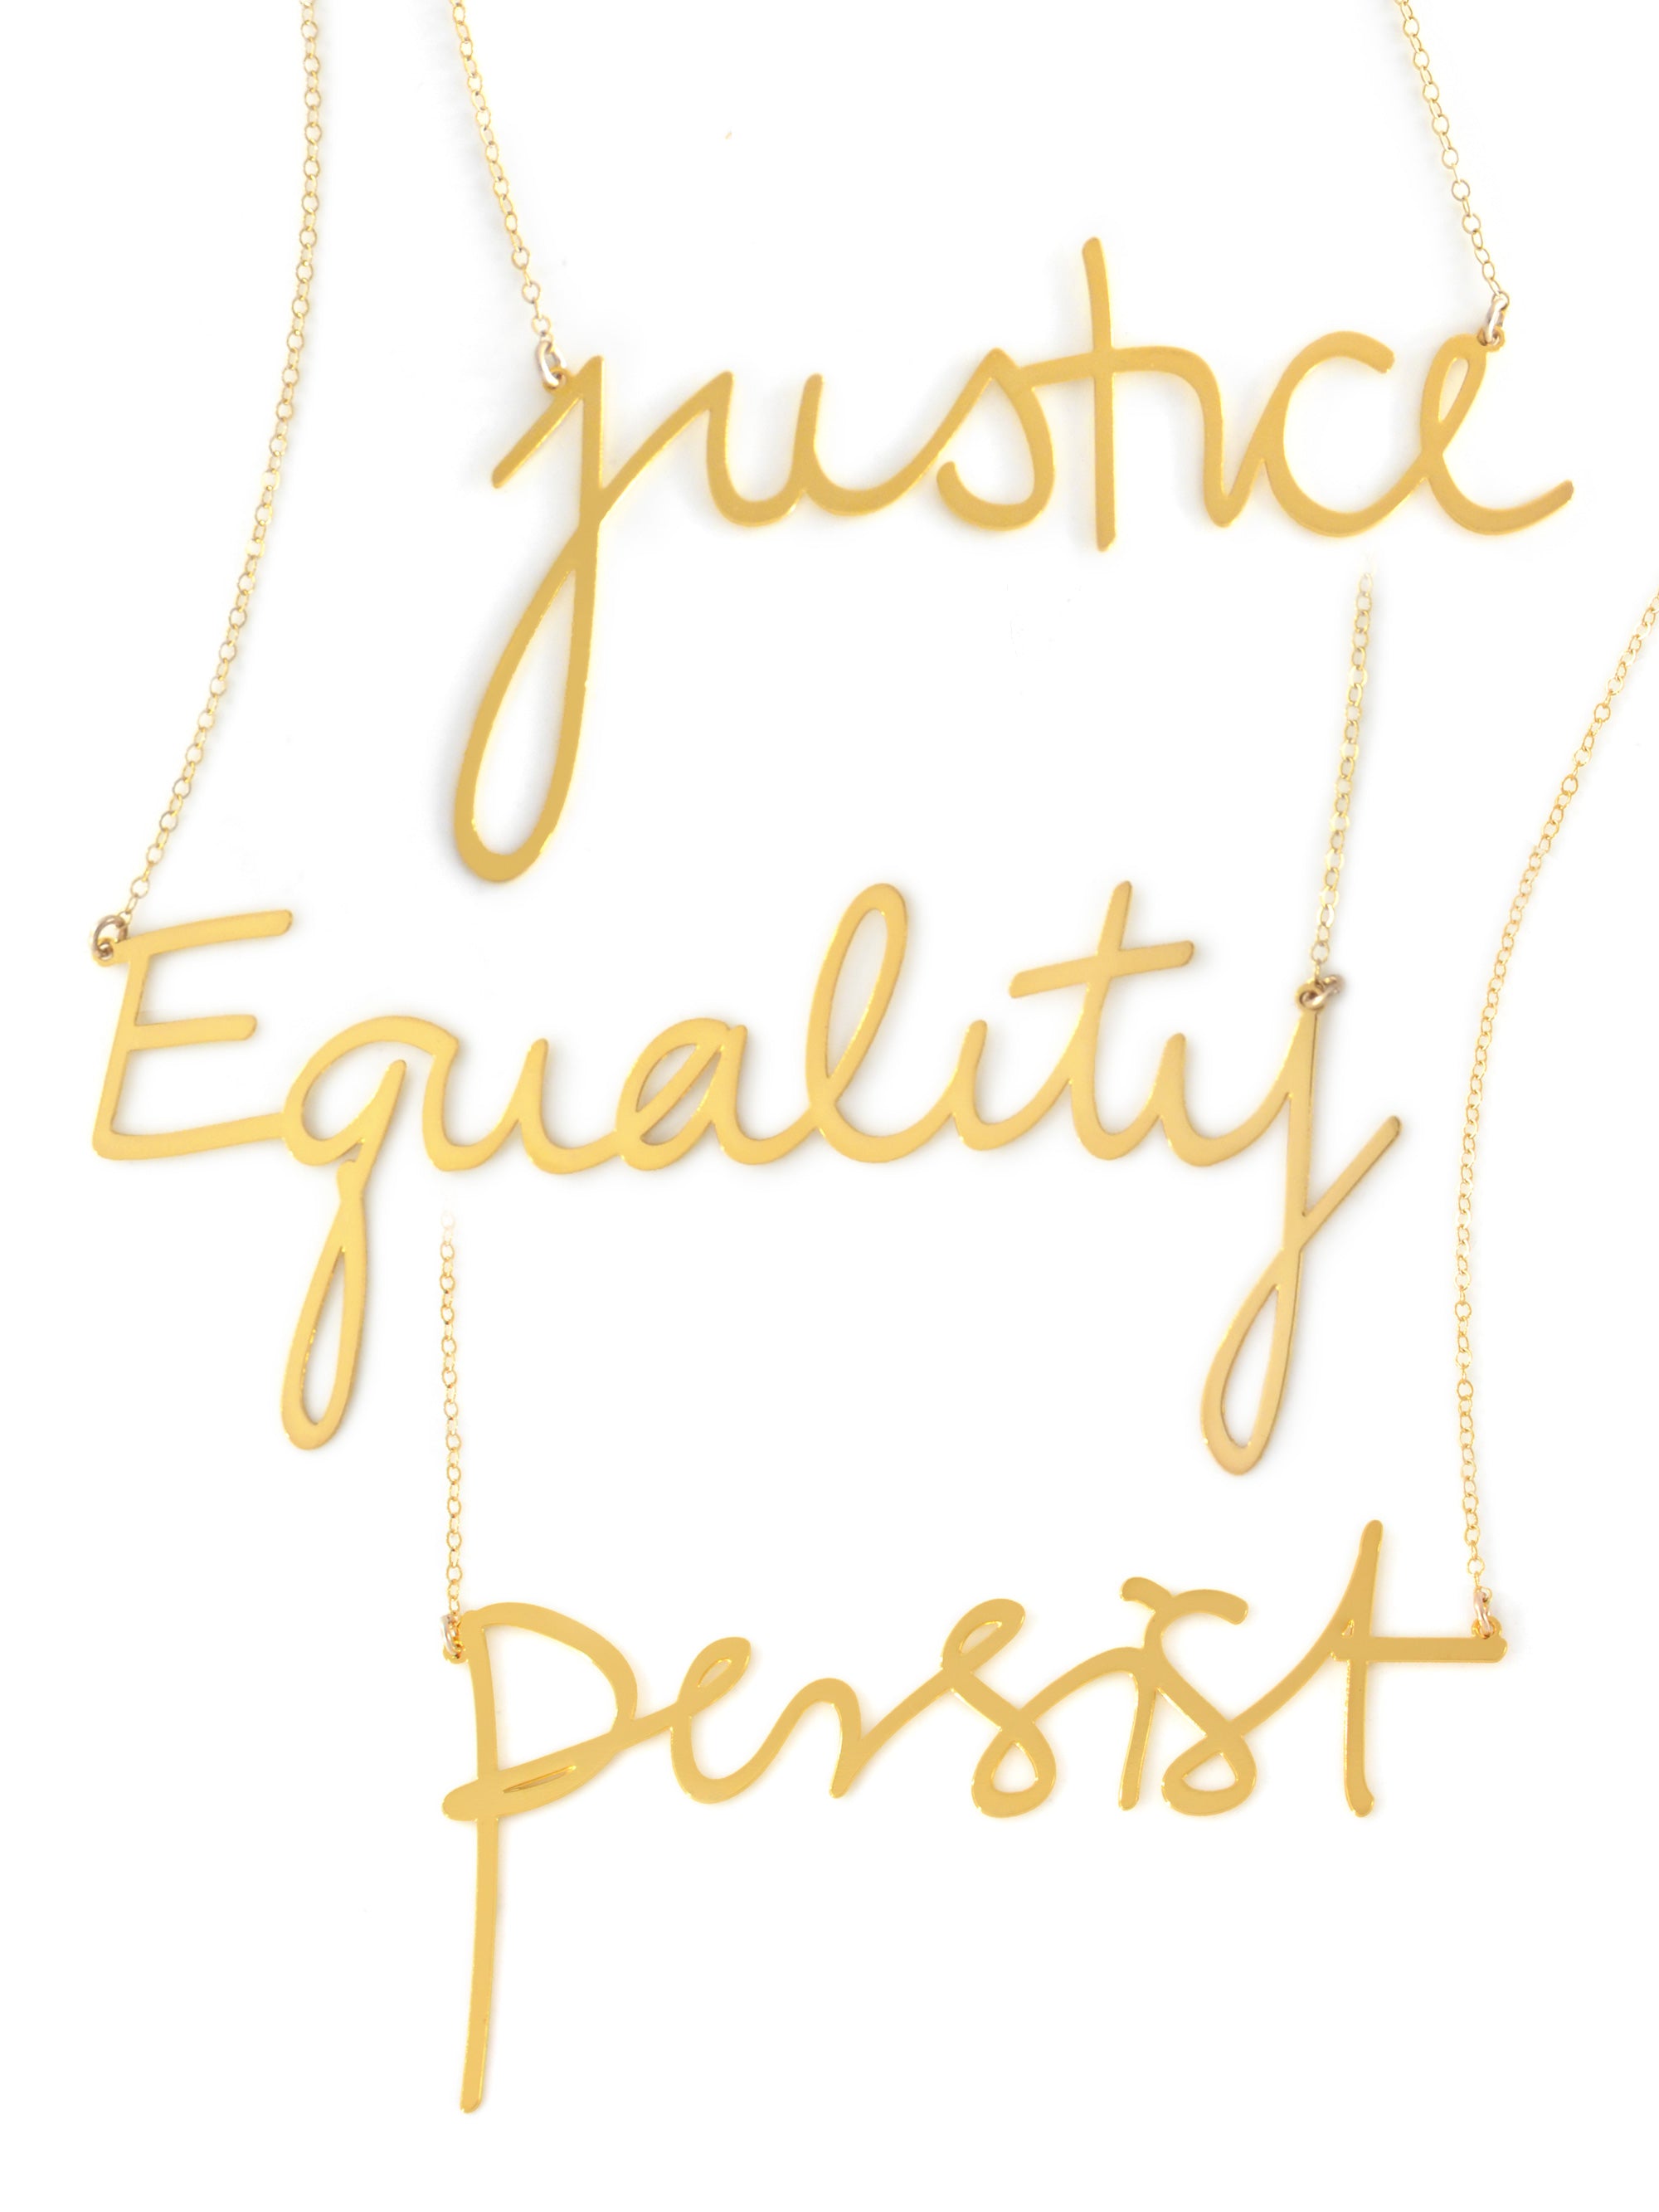 Activist Gift Set - High Quality, Hand Written, Self Love Word Gift Set Necklaces - Featuring the Words Resist, Justice, Persist, Equality, No More Injustice, No More Silence, No More Patriarchy - Available in Gold and Silver - Small and Large Sizes - Made in USA - Brevity Jewelry